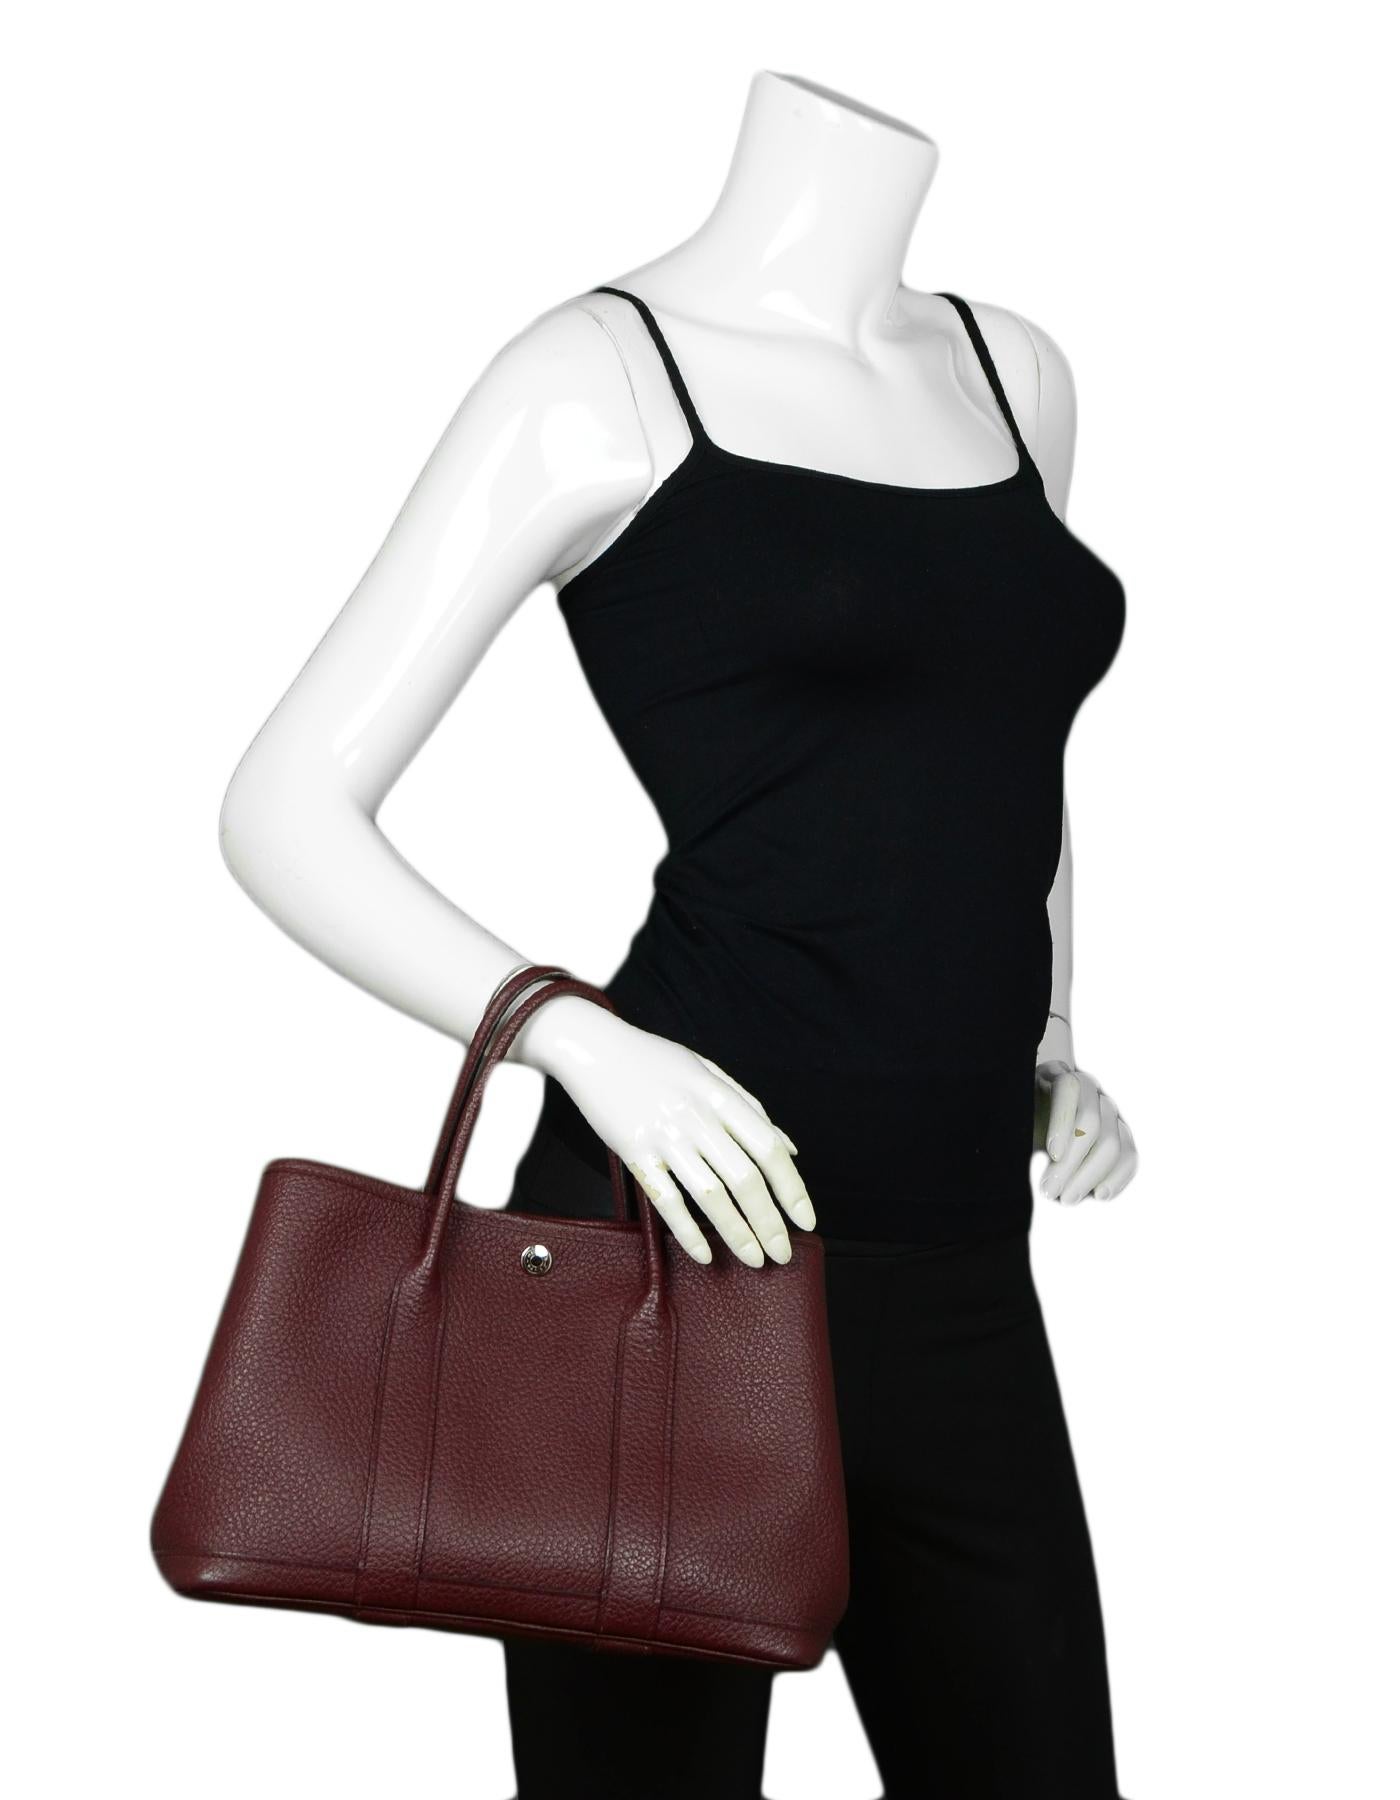 Hermes Burgundy Negonda Leather Garden Party 30 Bag

Made In: France
Color: Burgundy
Hardware: Silvertone
Materials: Leather
Lining: Fine textile lining
Closure/Opening: Open top with middle snap closure
Exterior Pockets: None
Interior Pockets: One